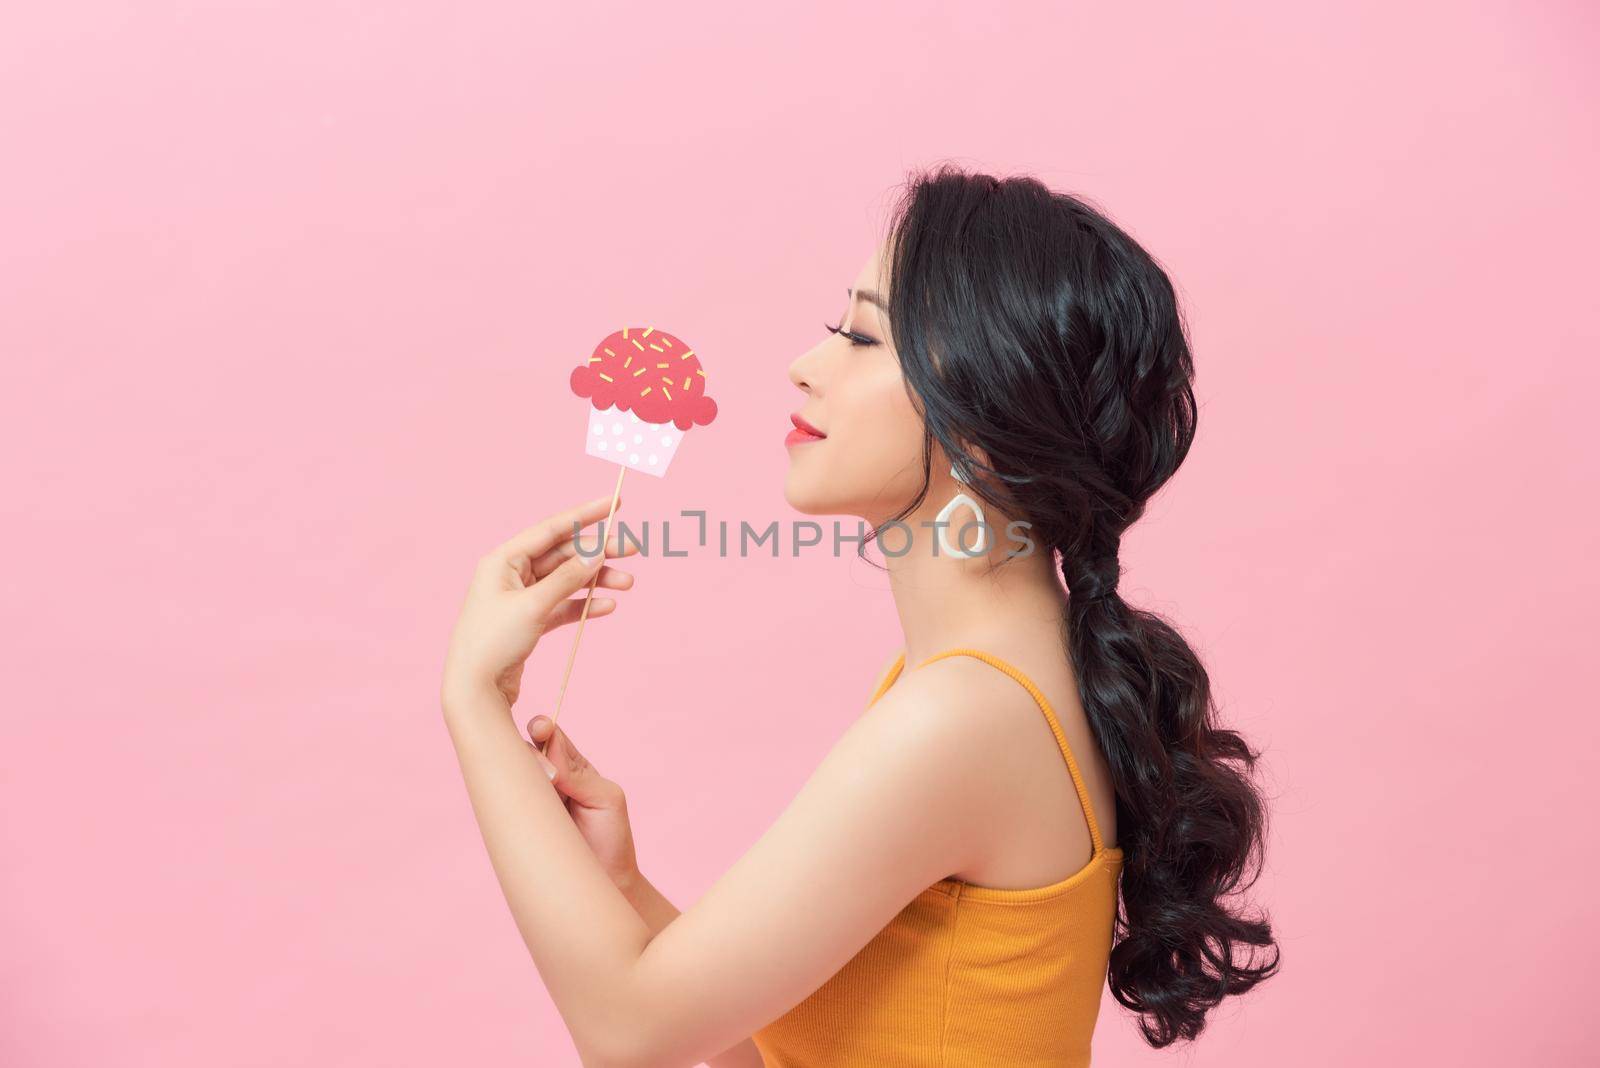 Charming lady hold cupcake shape on stick good mood nice day over pastel pink background